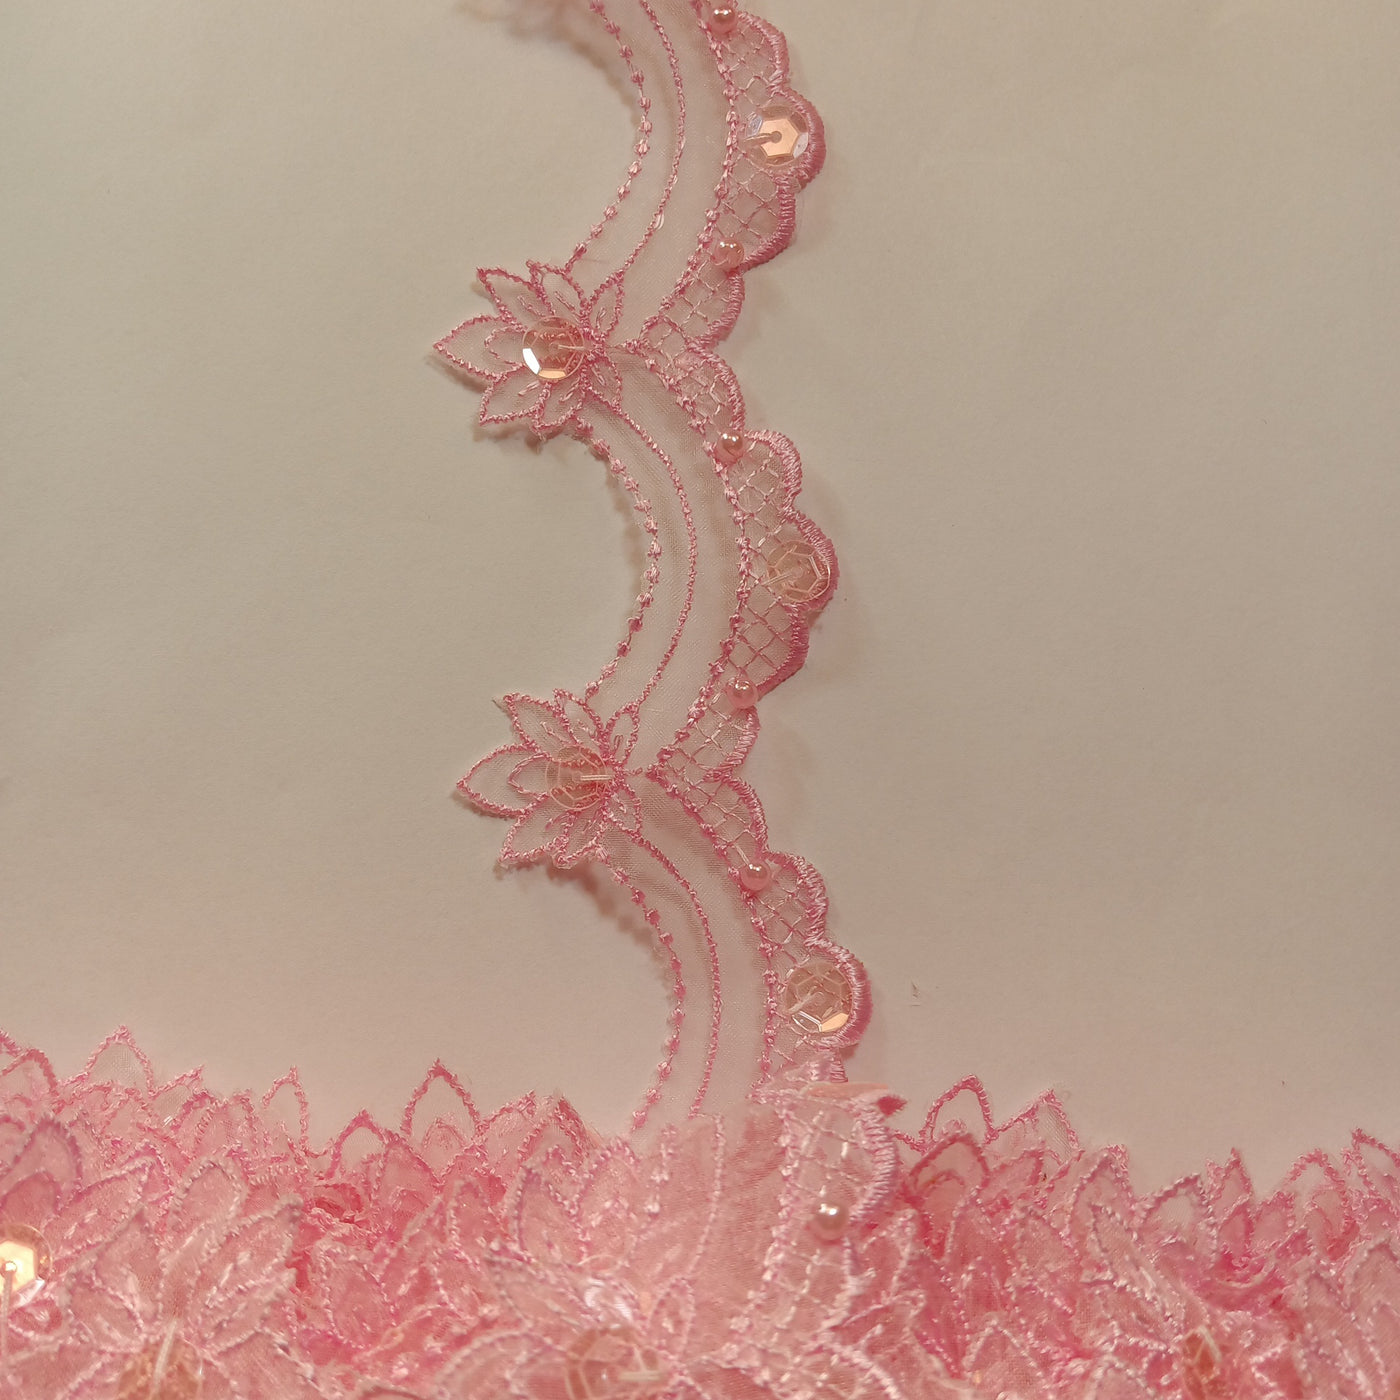 Beaded Pink Lace Trim Embroidered on 100% Polyester Organza . Large Arch Scalloped Trim. Formal Trim. Perfect for Edging and Gowns.  Sold by the Yard.  Lace Usa